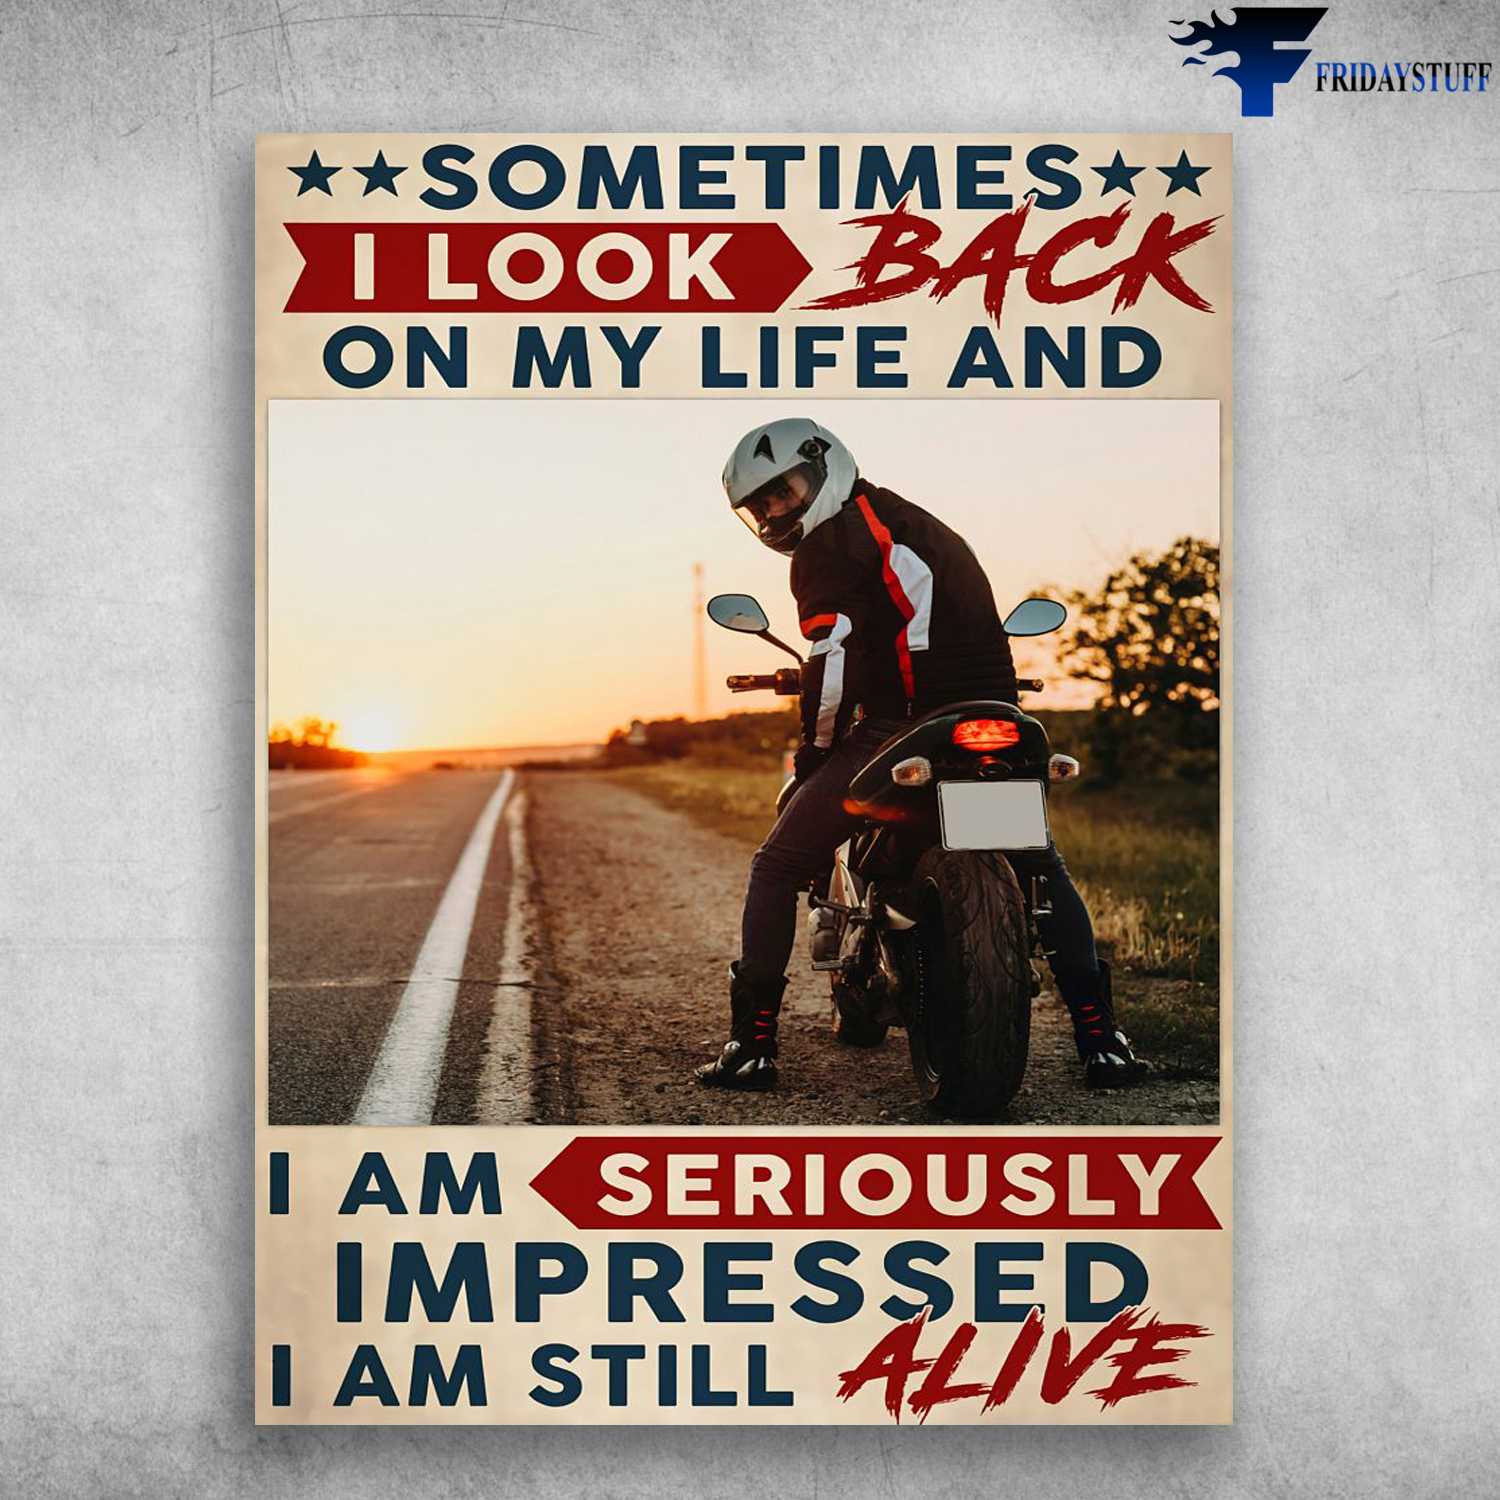 Motorcycle Man, Biker Poster - Sometimes I Look Back, On My Life And I Am Seriously Impressed, I Am Still Alive